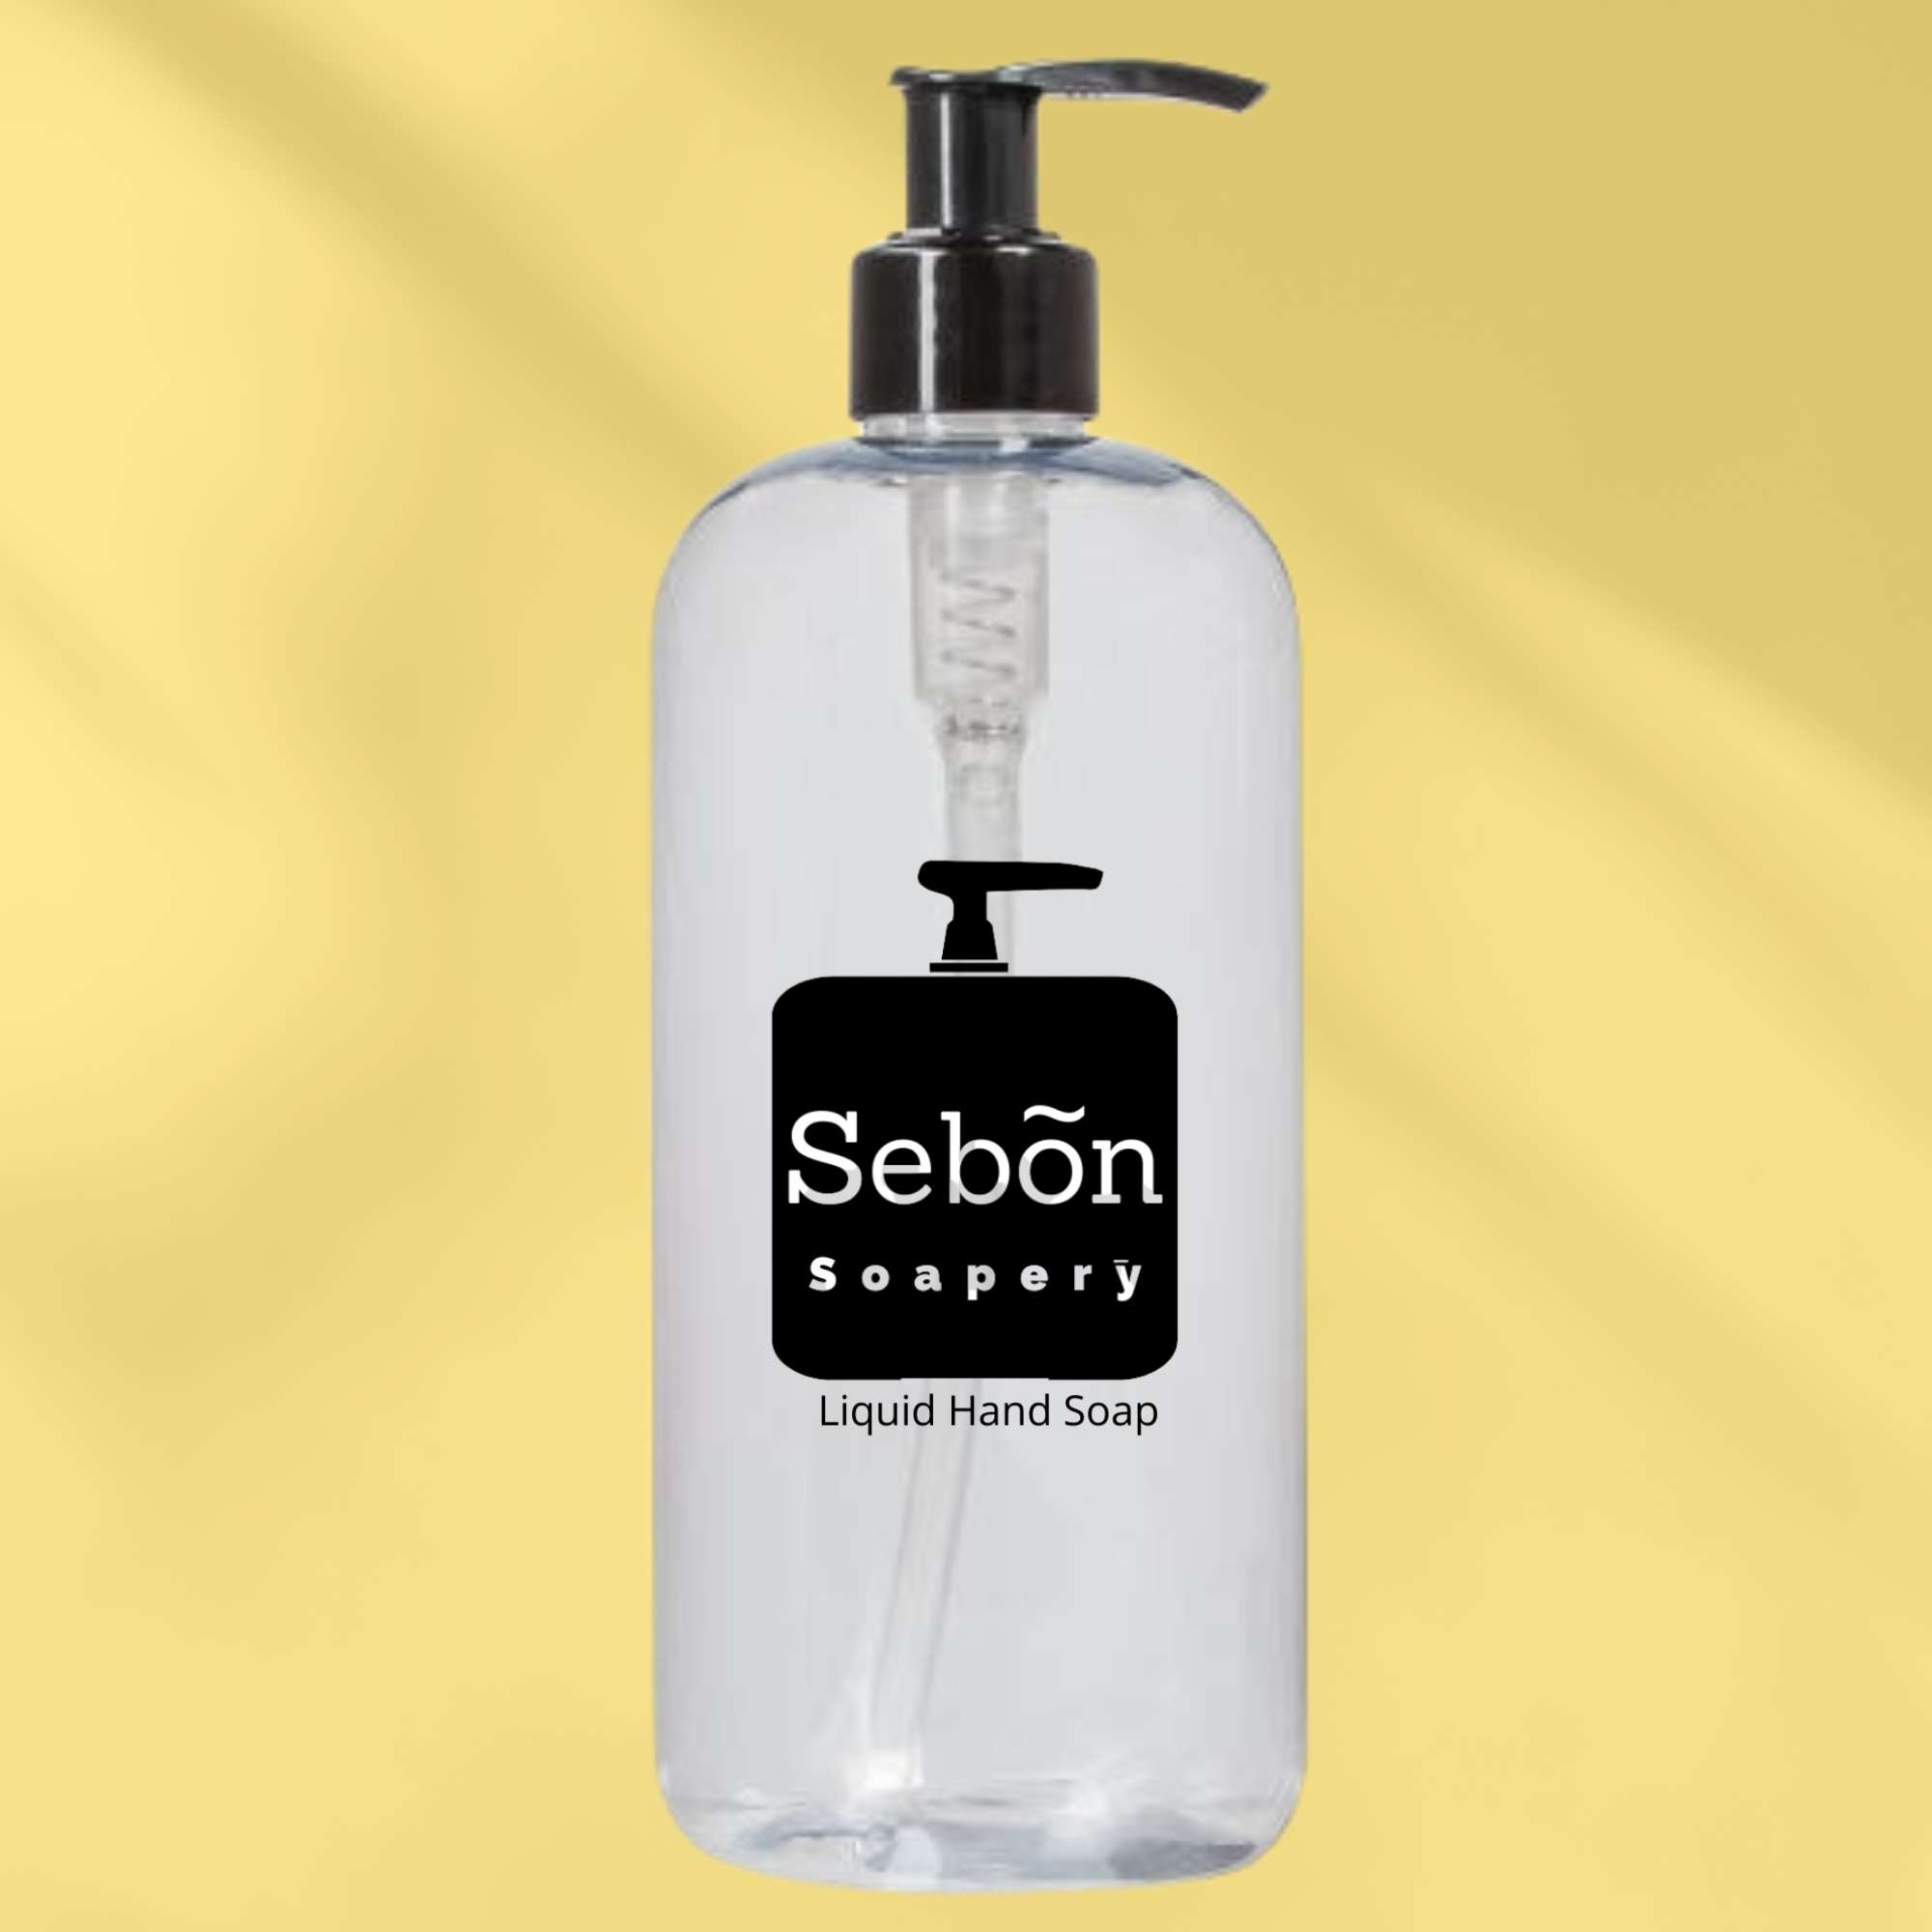 Sebon Lily & Rose Scented Liquid Hand Soap with Olive Oil